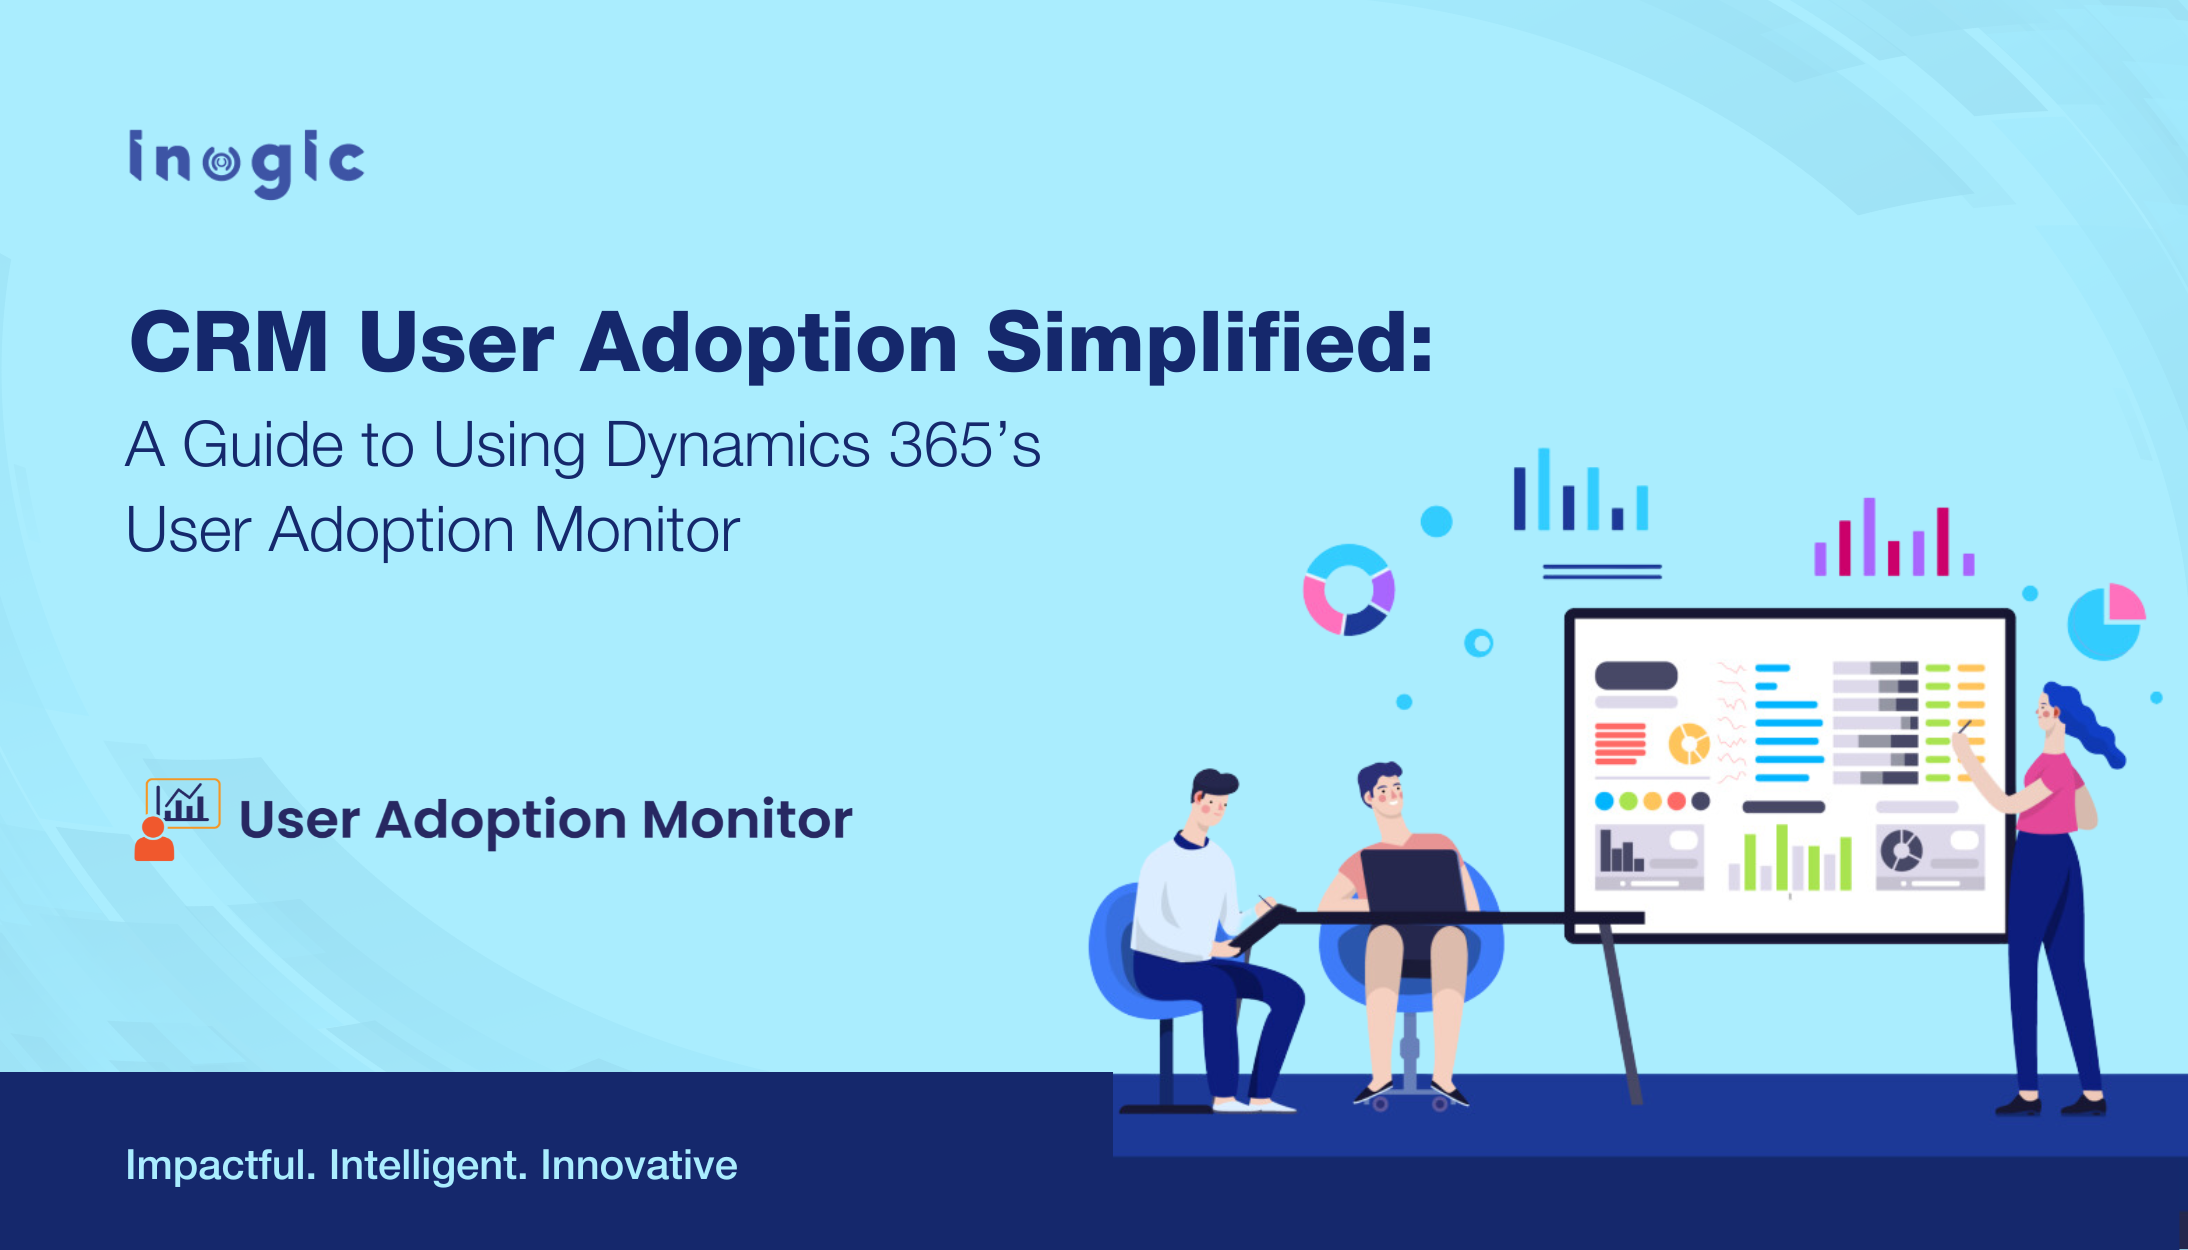 CRM User Adoption Simplified: A Guide to Using Dynamics 365’s User Adoption Monitor